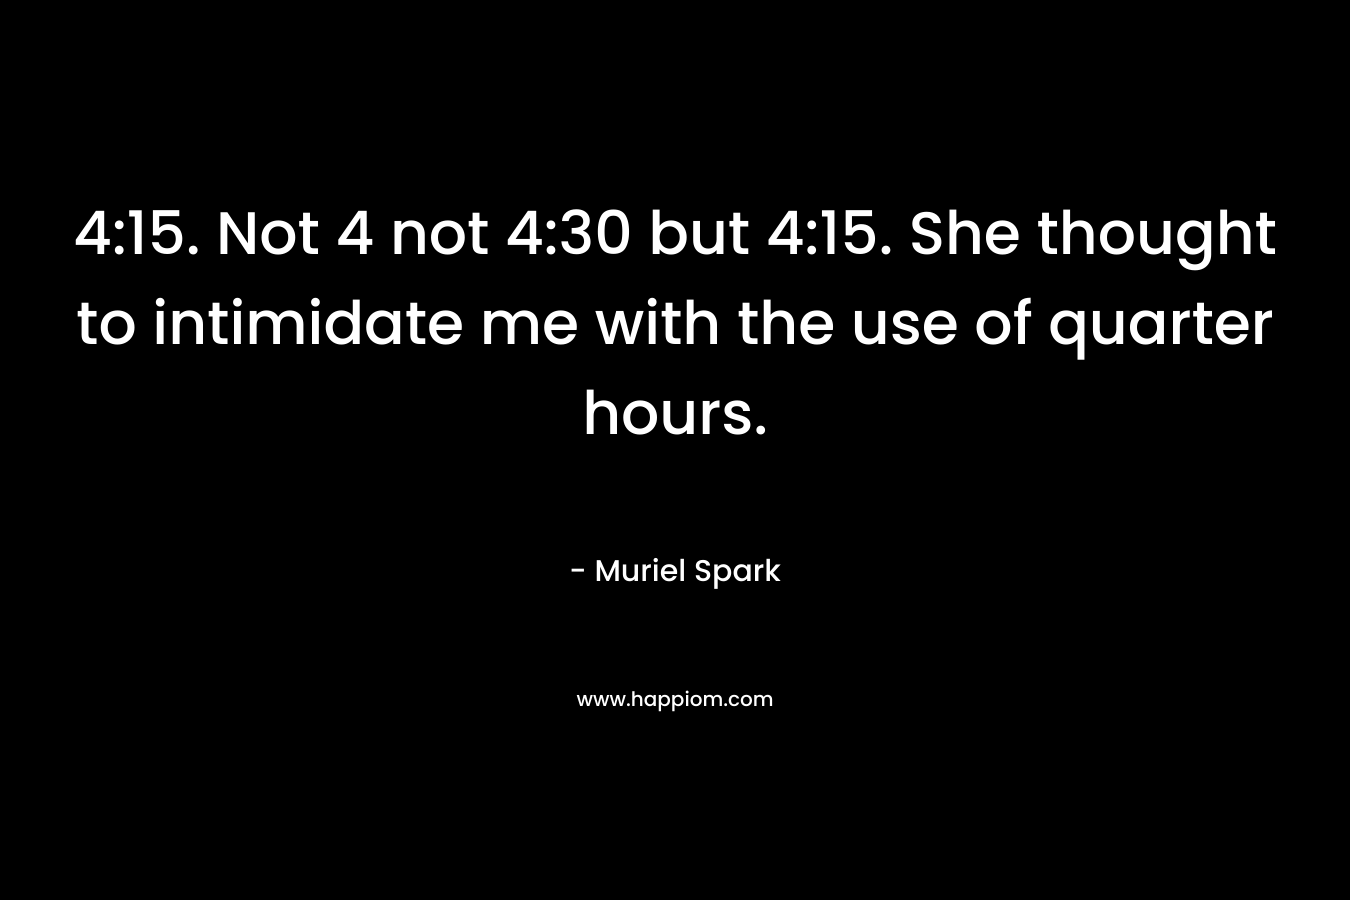 4:15. Not 4 not 4:30 but 4:15. She thought to intimidate me with the use of quarter hours. – Muriel Spark